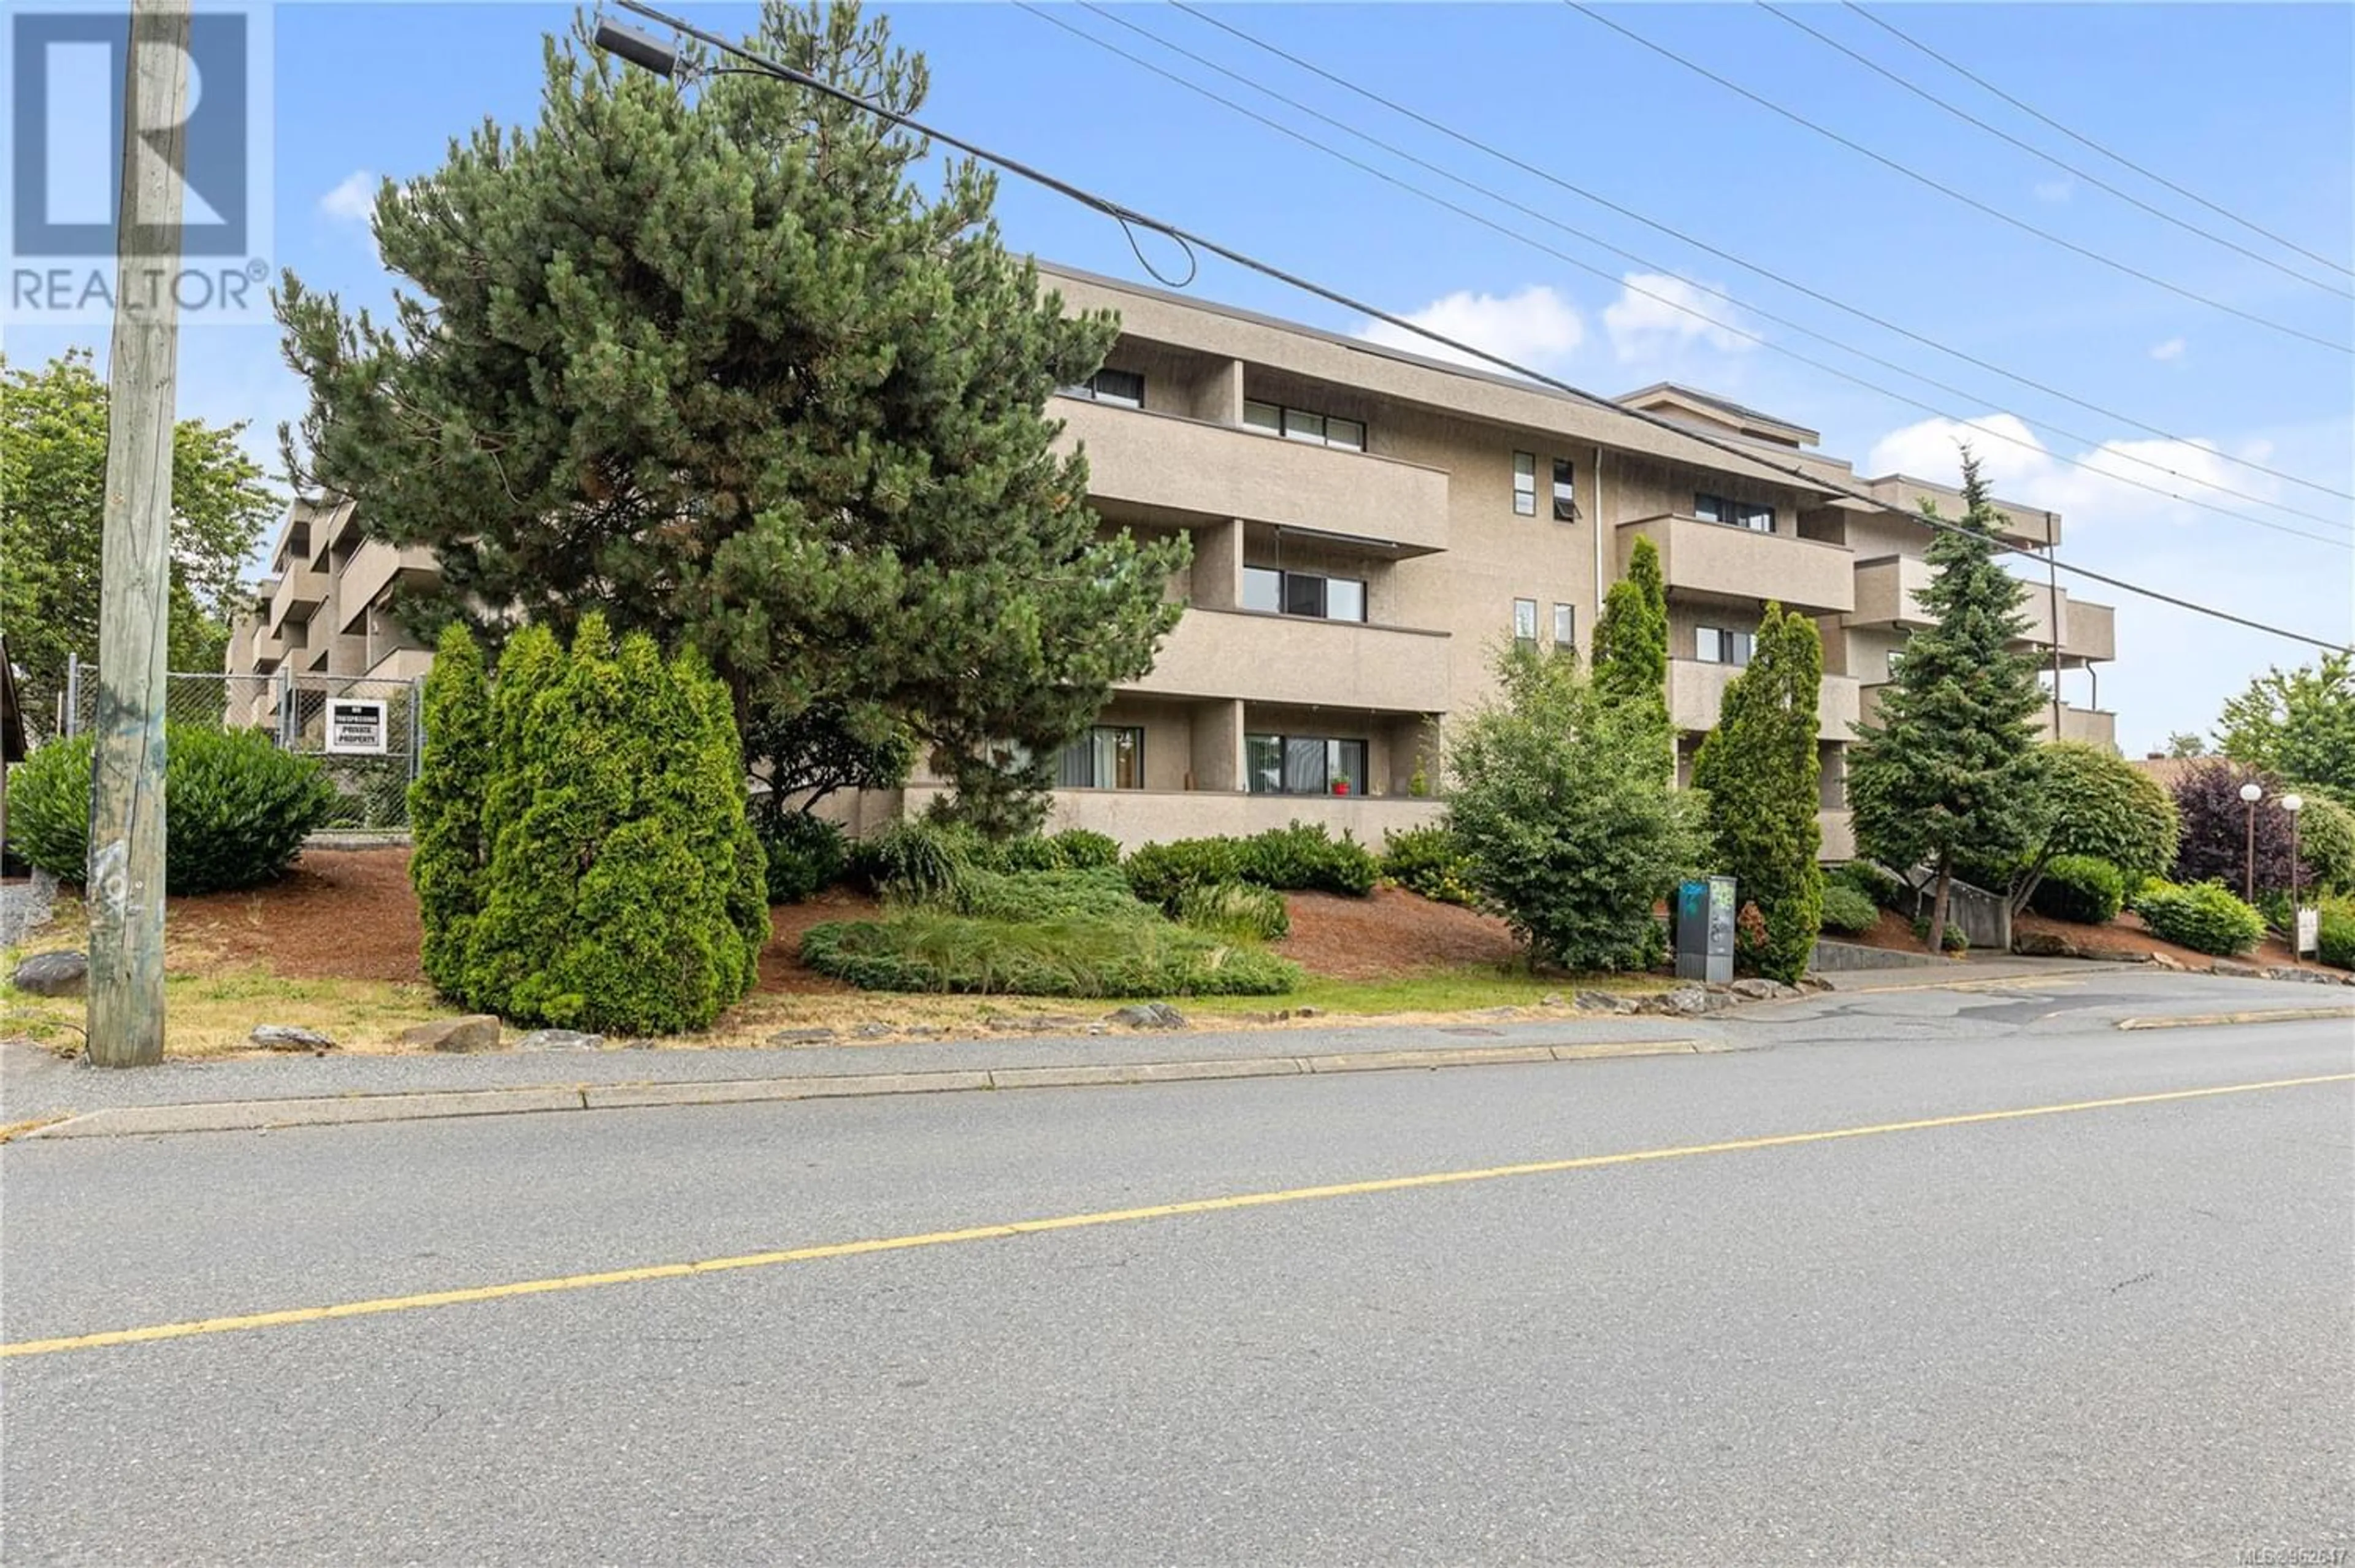 A pic from exterior of the house or condo for 102 550 Bradley St, Nanaimo British Columbia V9S5N4